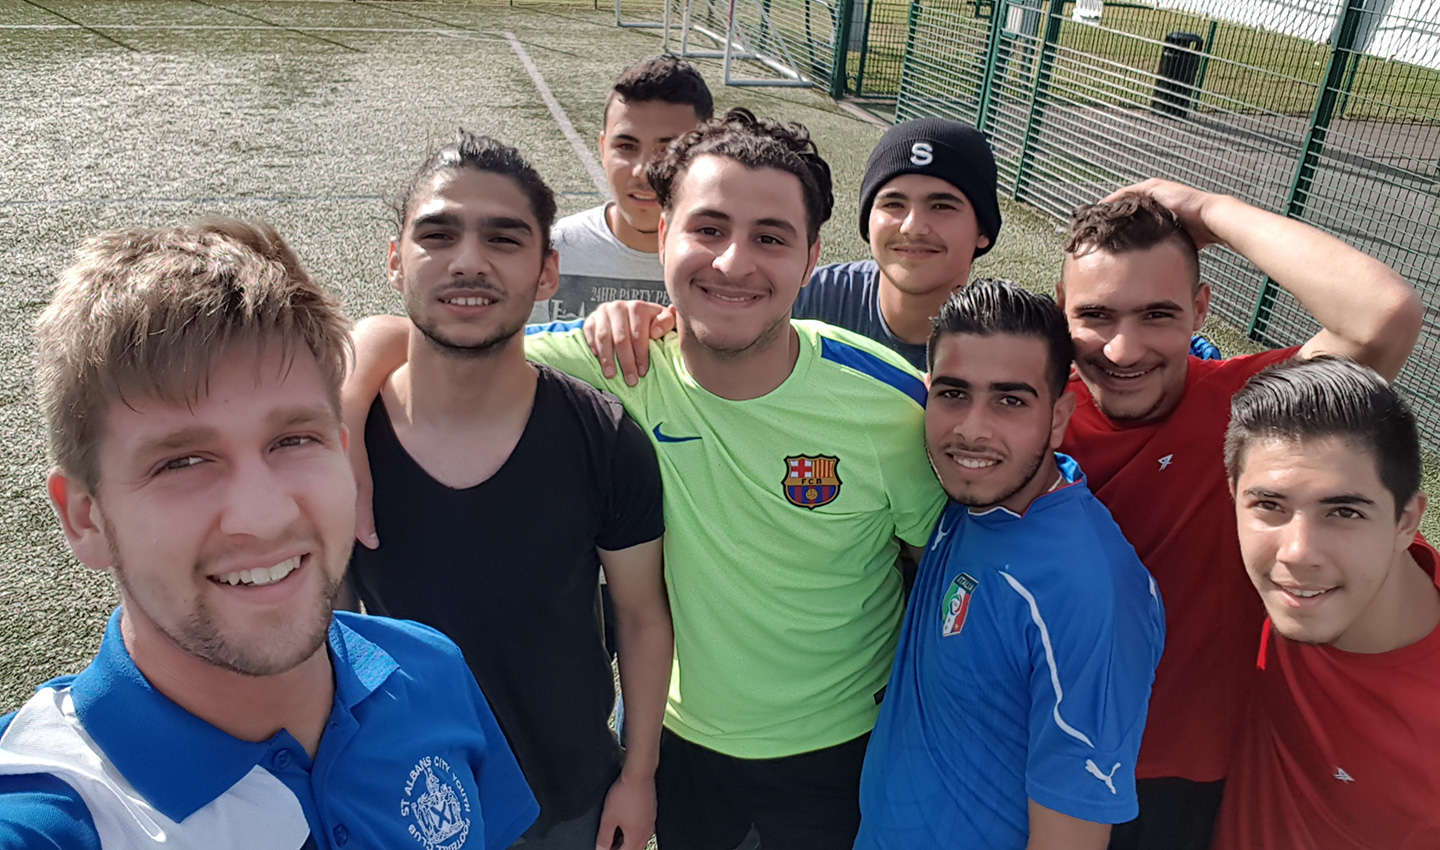 St Albans City Youth FC played a friendly match against a group of young refugees